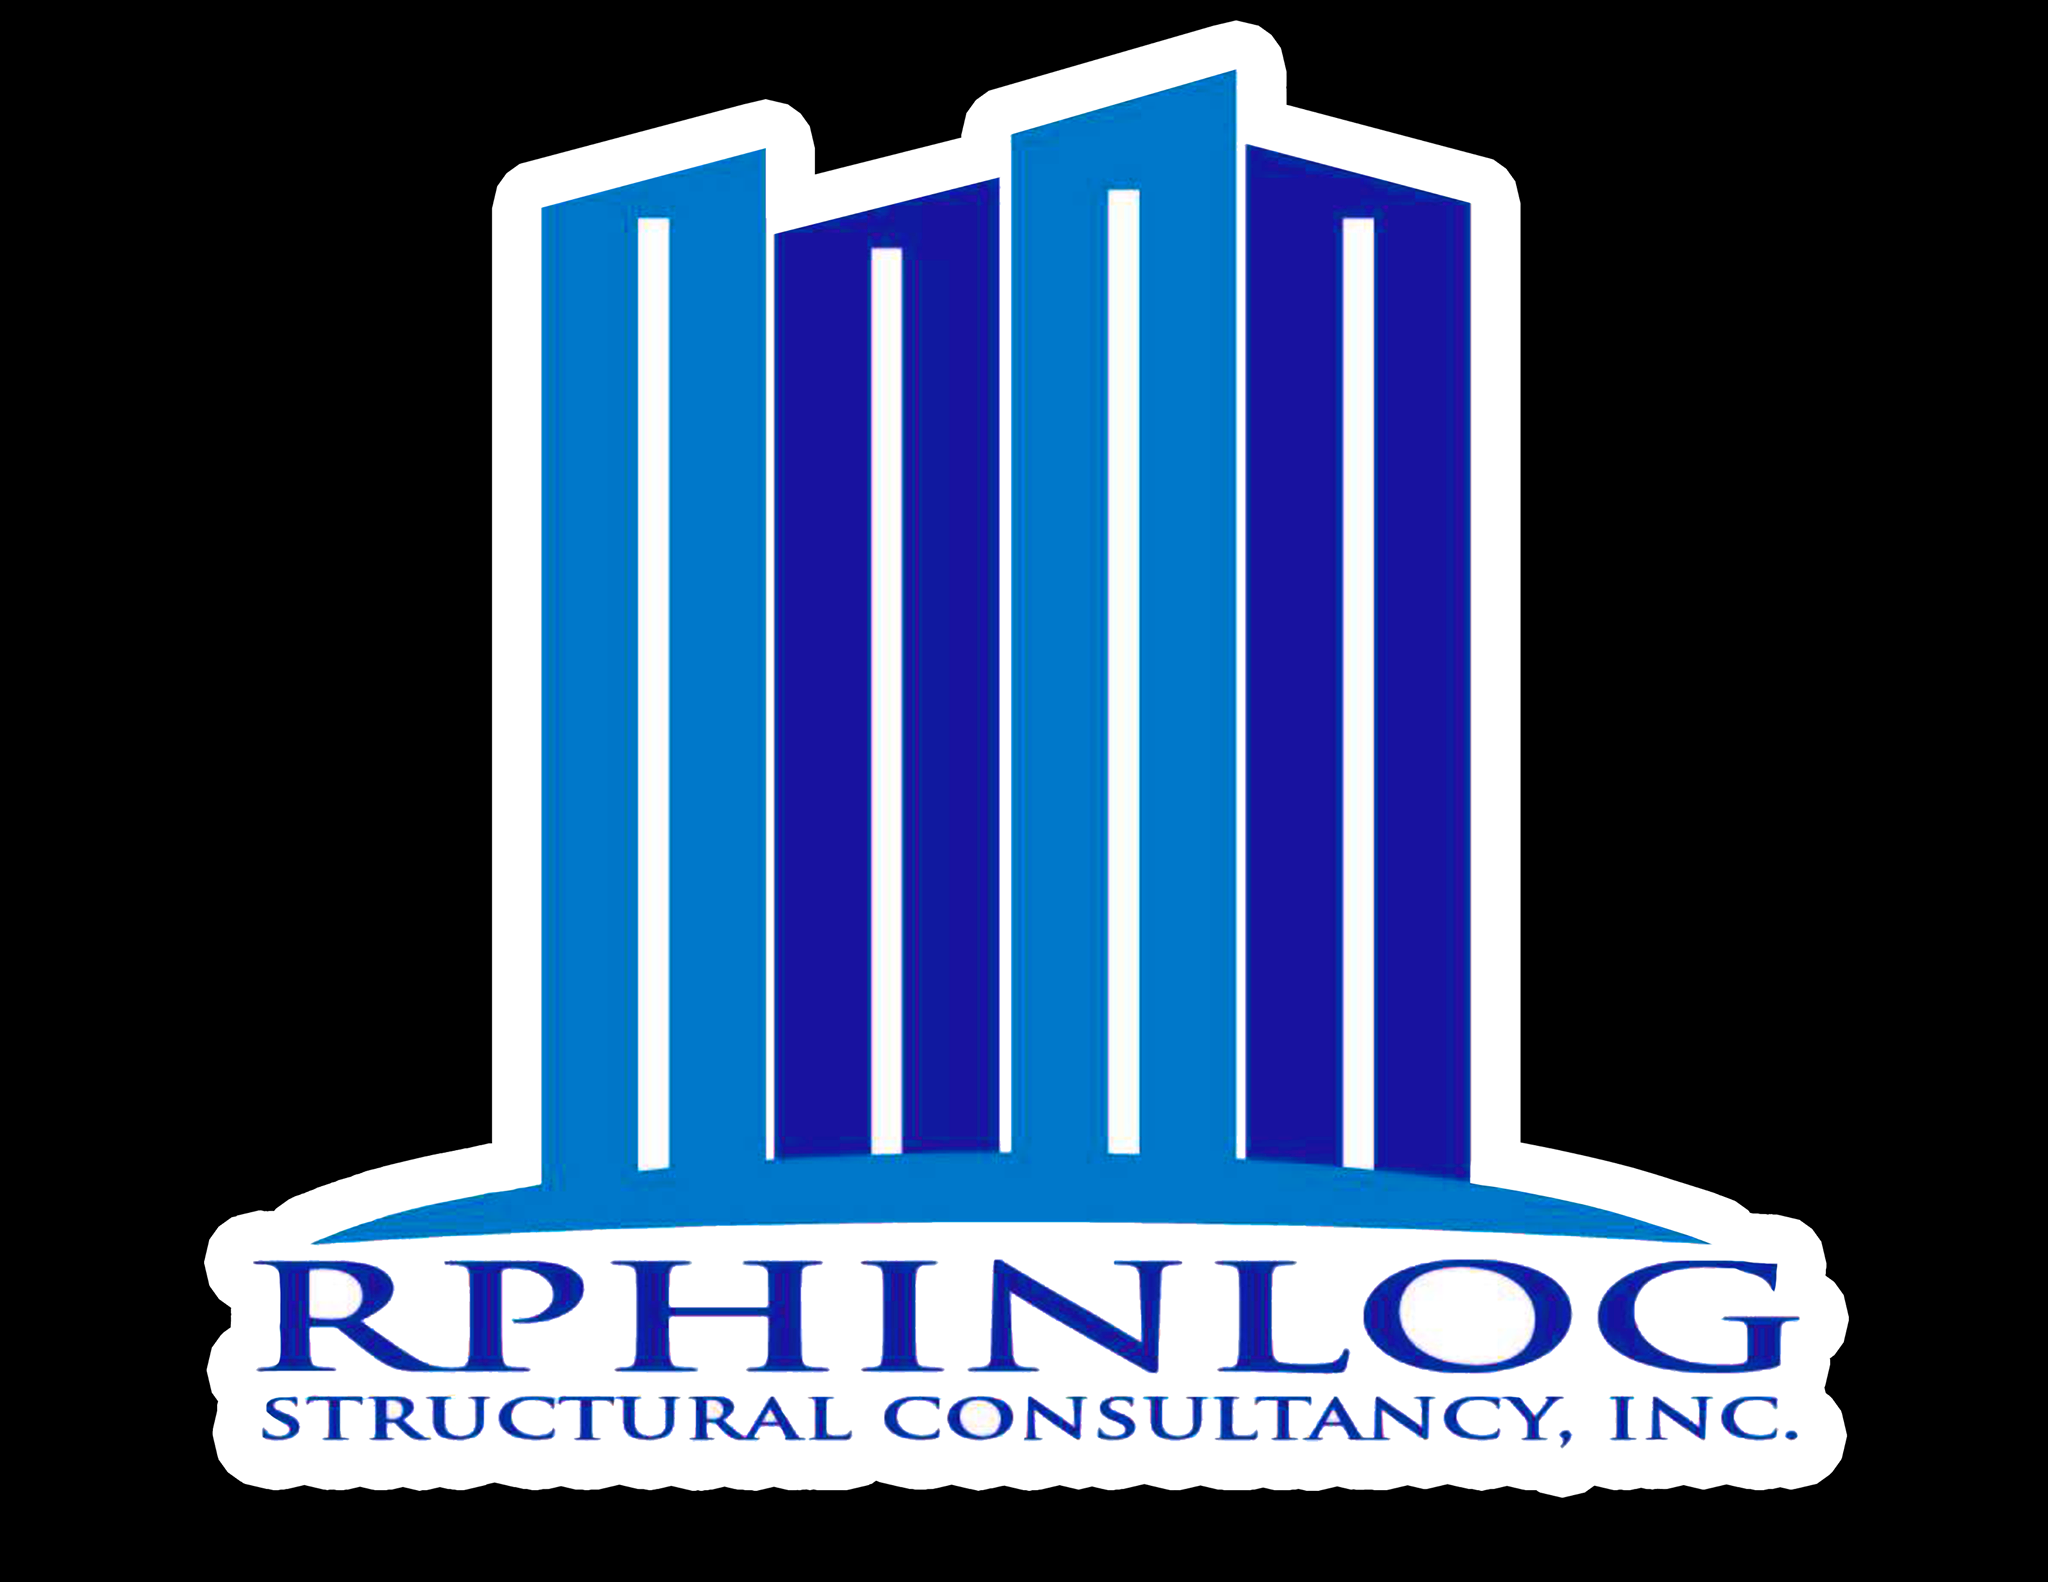 RPHinlog Structural Consultancy & Construction Services, Inc. 1 PROFILE